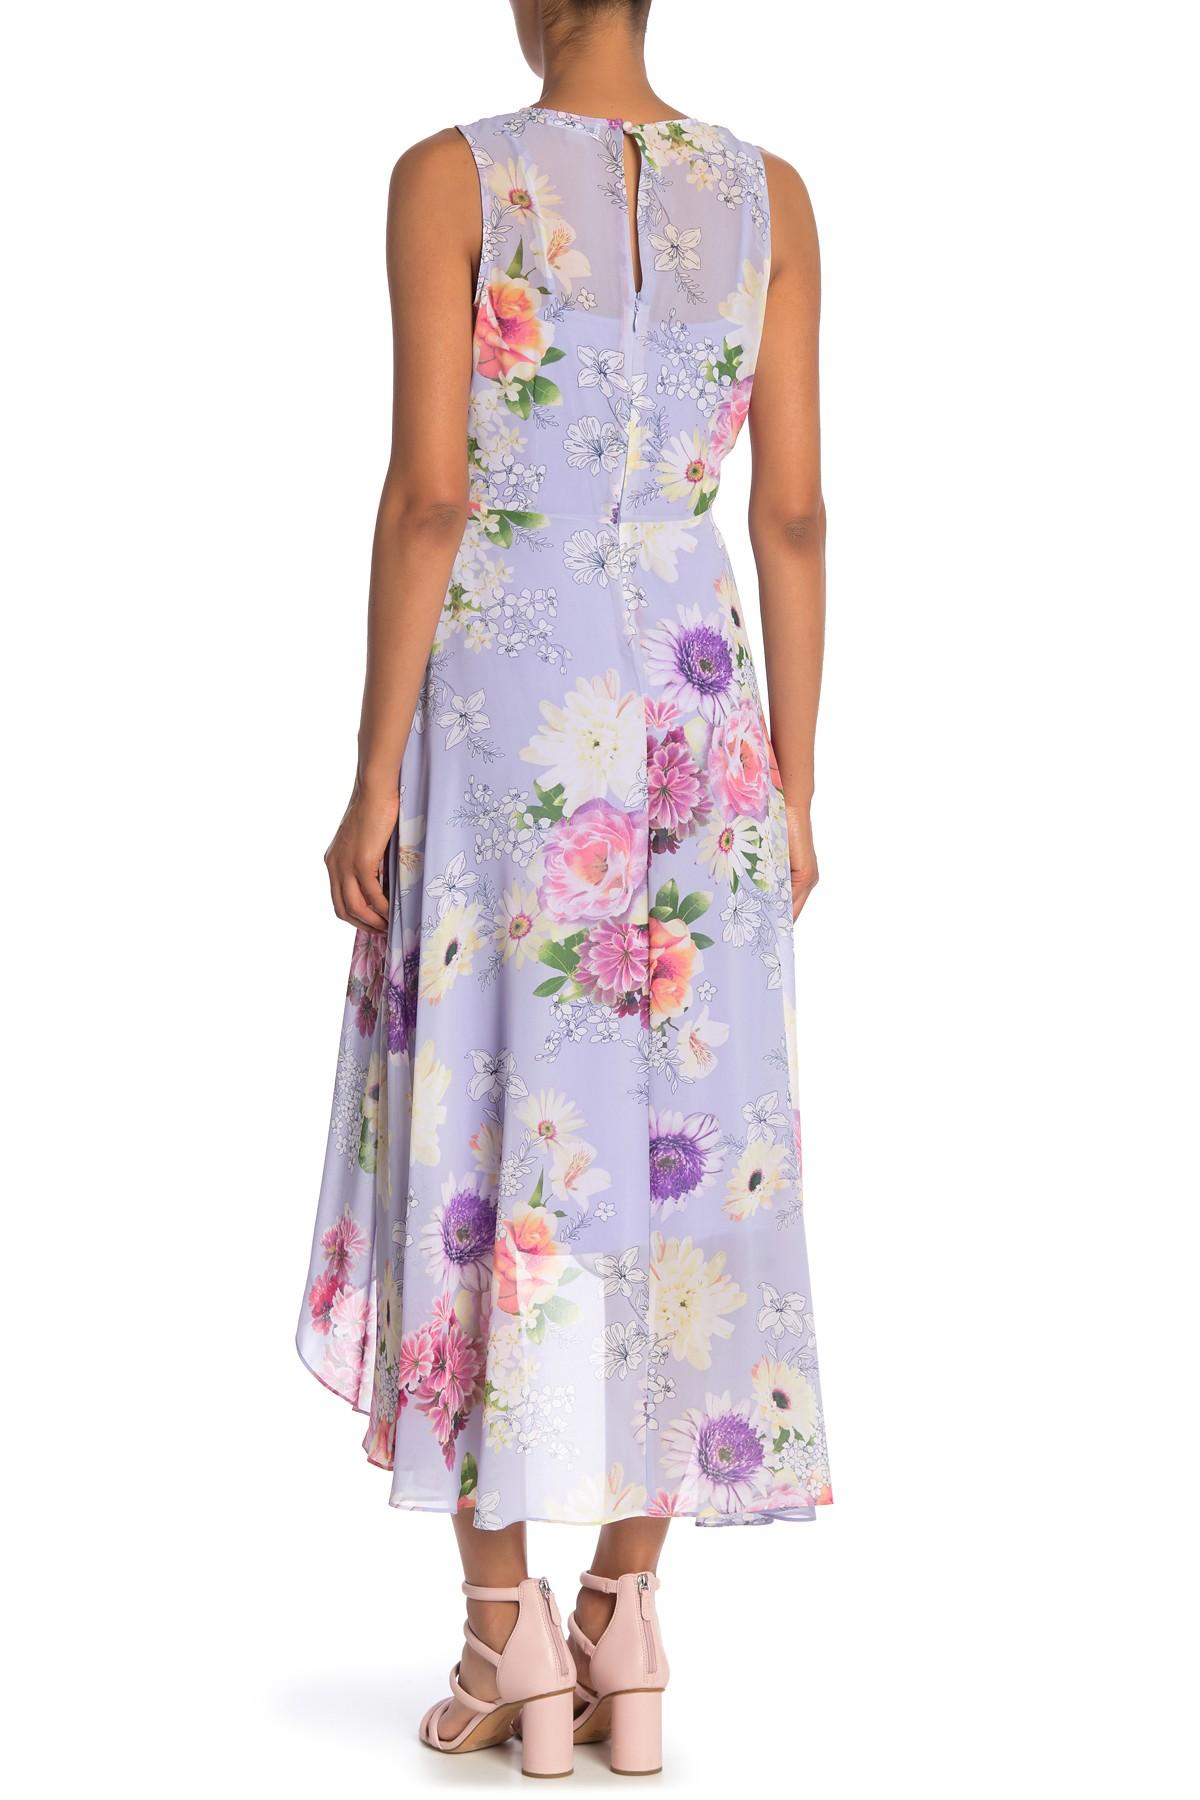 Calvin Klein Synthetic Floral Wrap High/low Midi Dress in Purple - Lyst